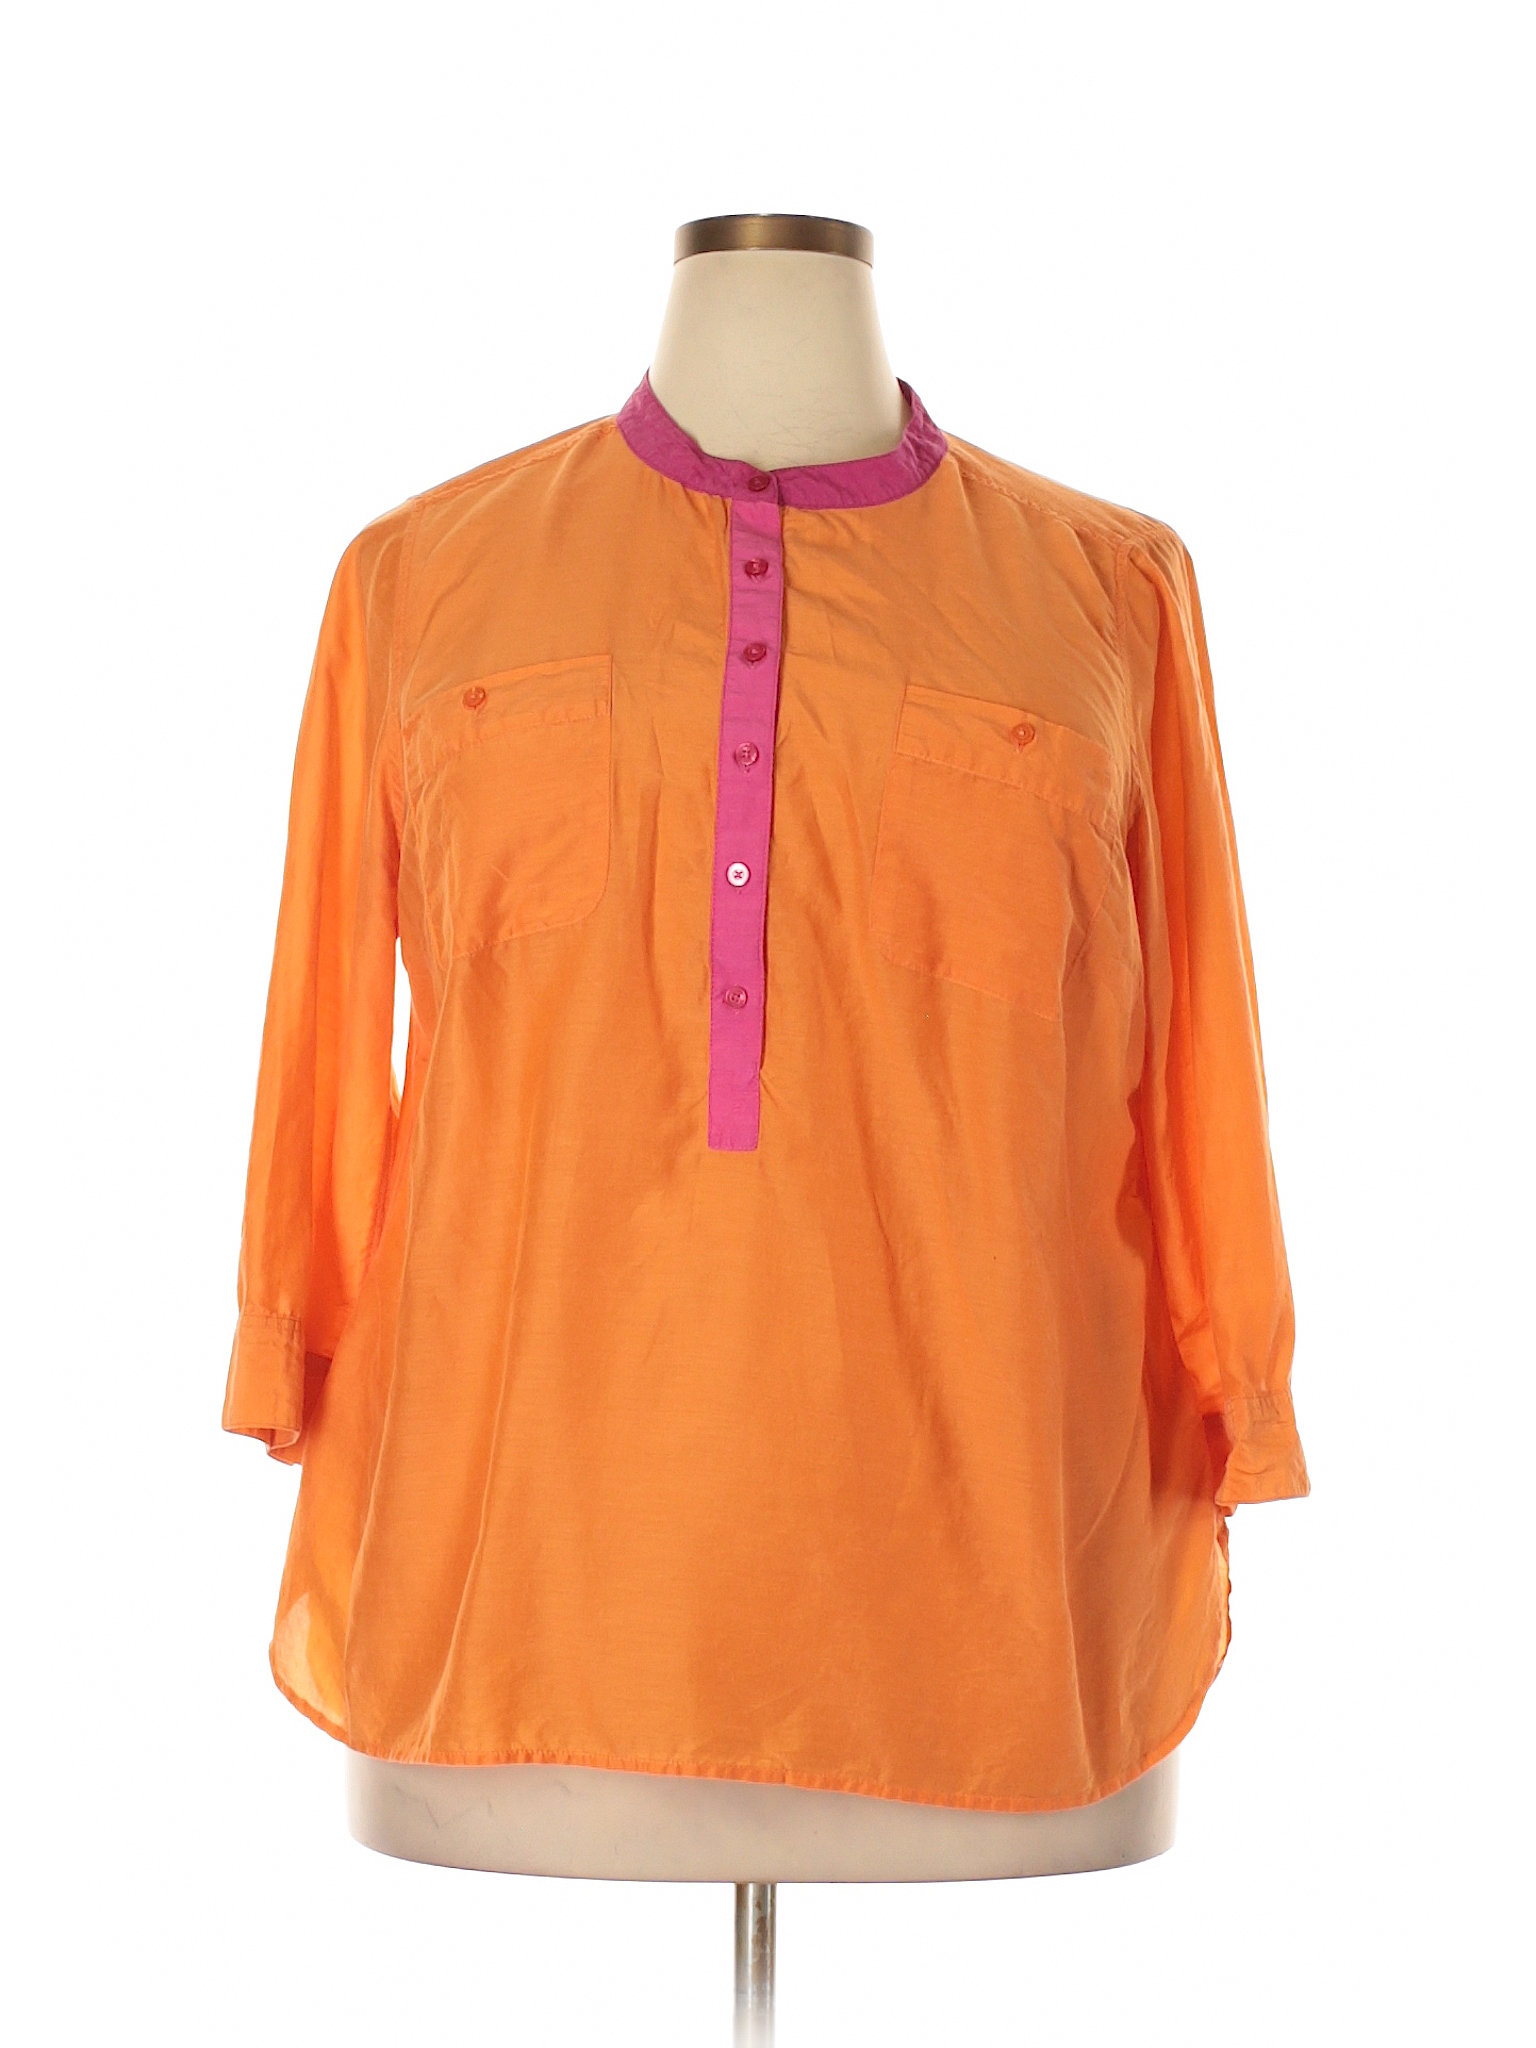 Jcpenney Solid Orange 3/4 Sleeve Blouse Size 2X (Plus) - 70% off | thredUP